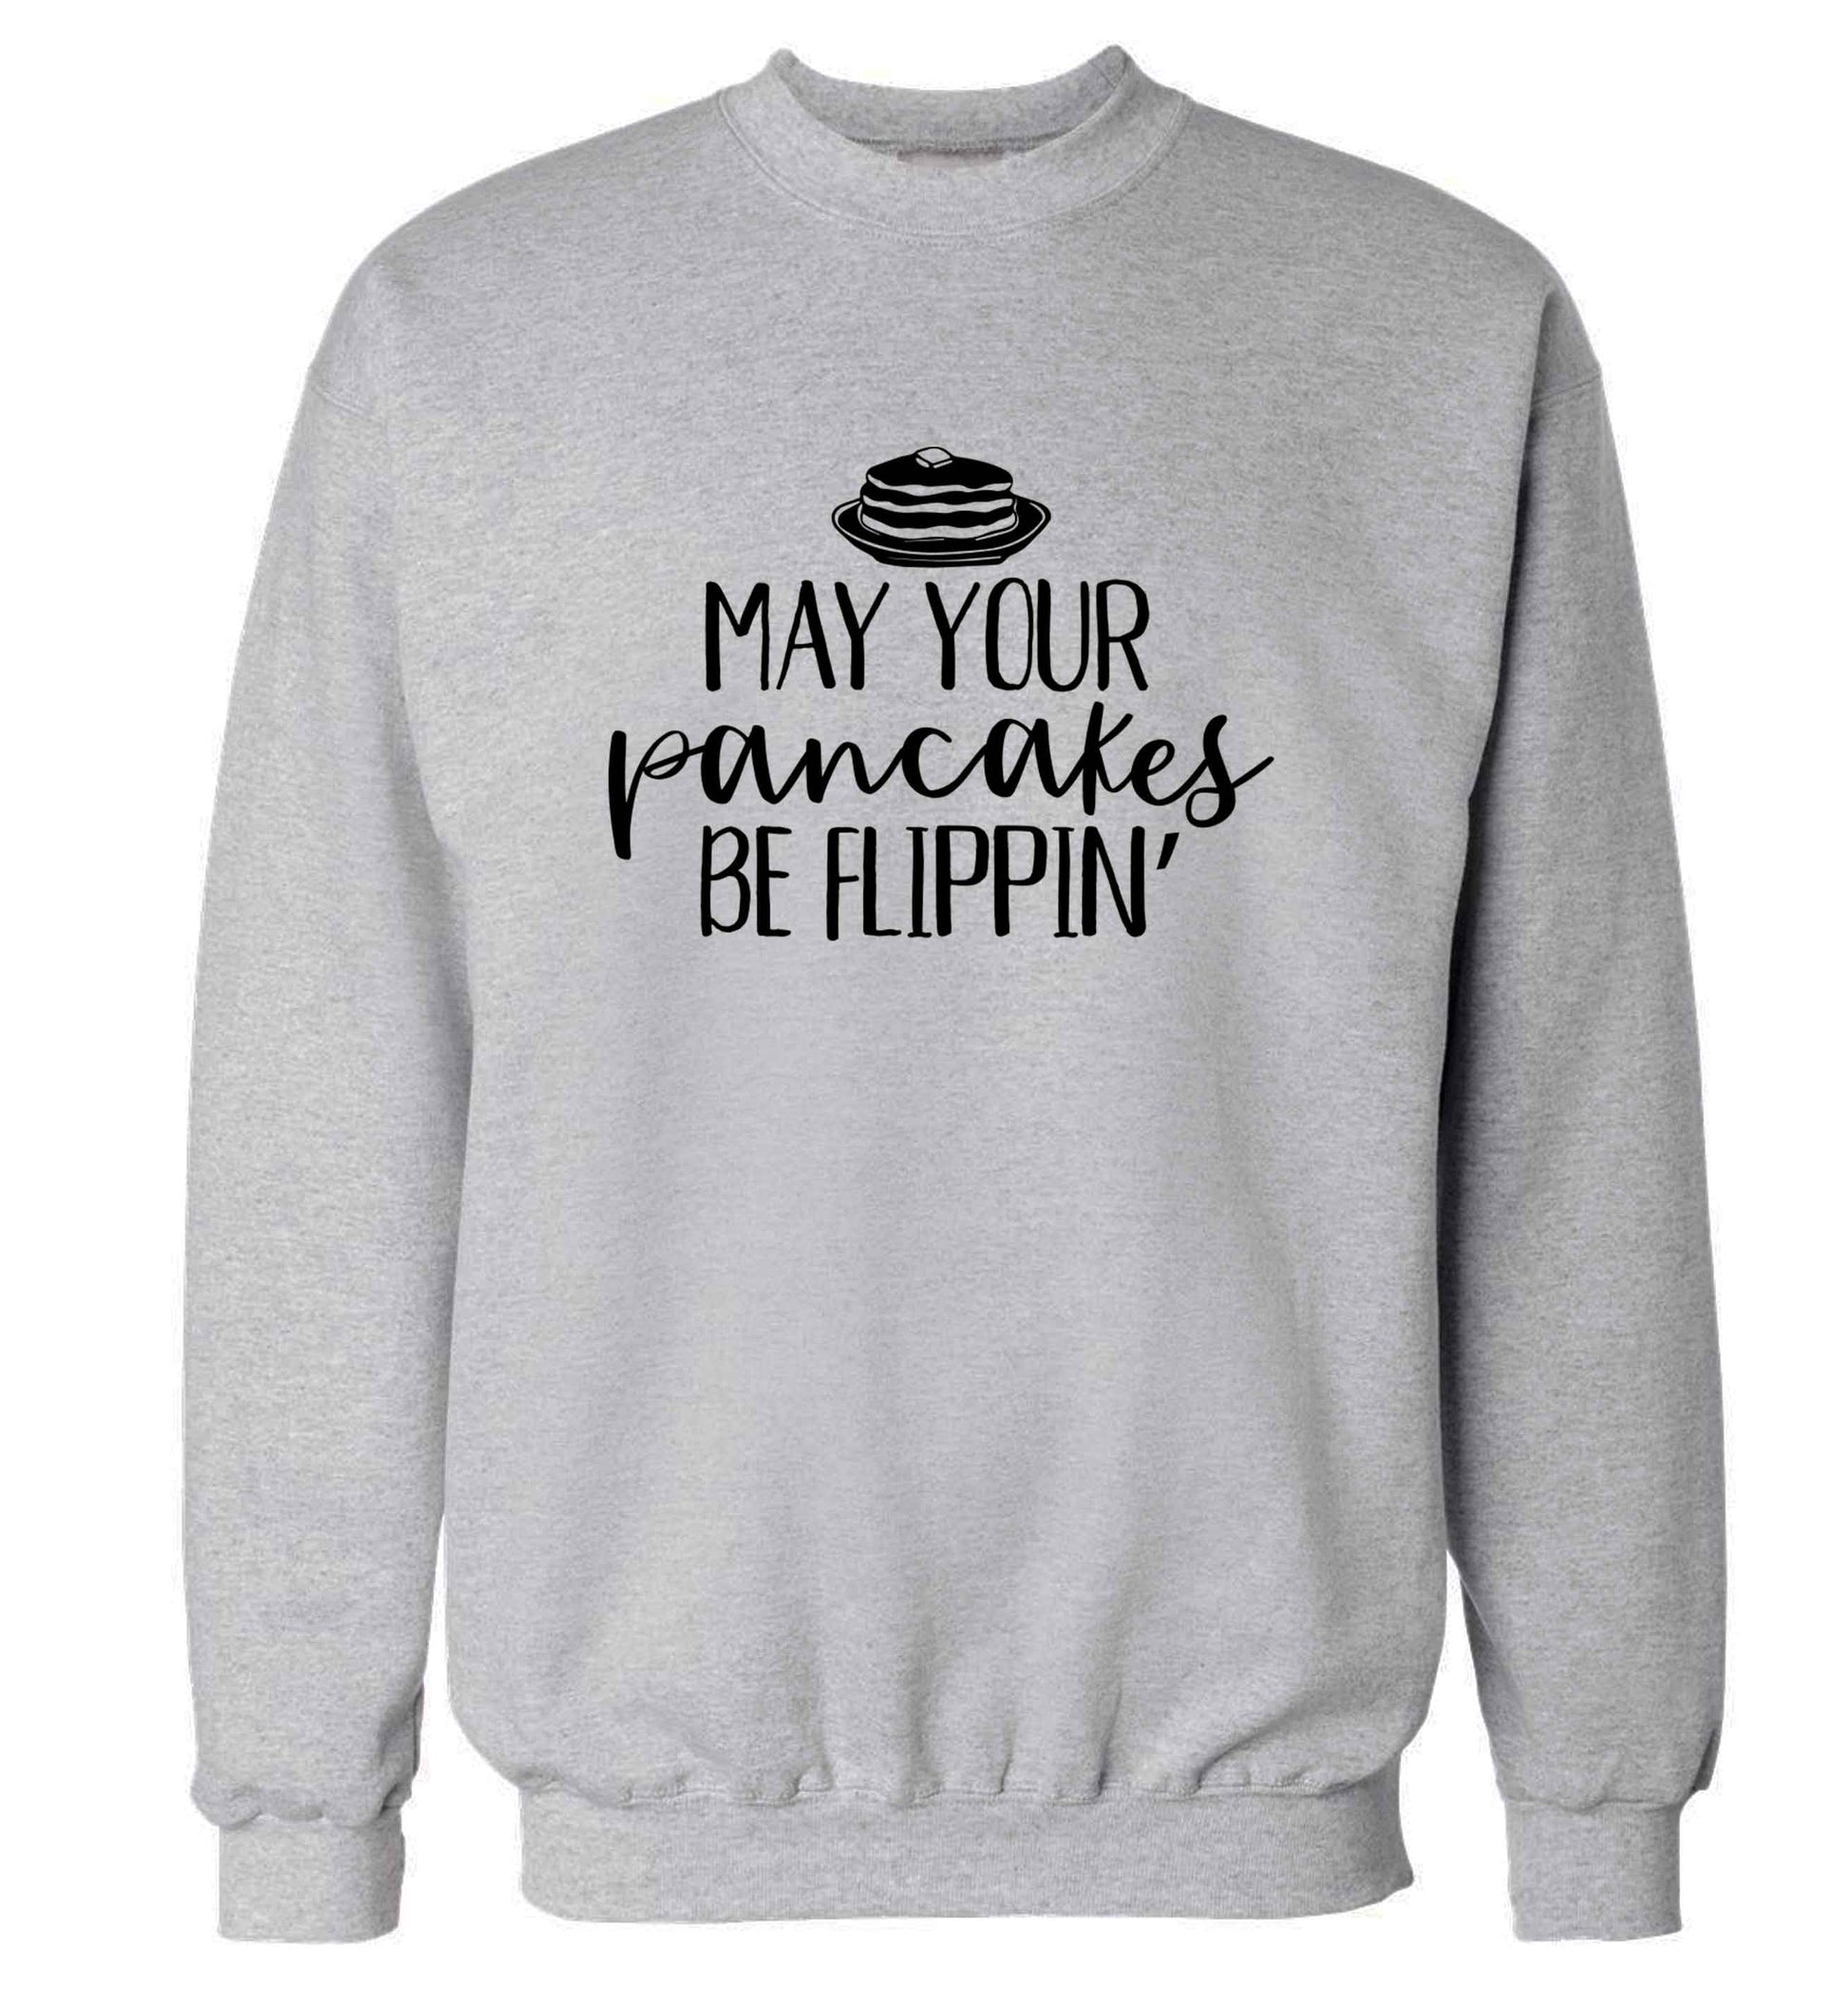 May your pancakes be flippin' adult's unisex grey sweater 2XL